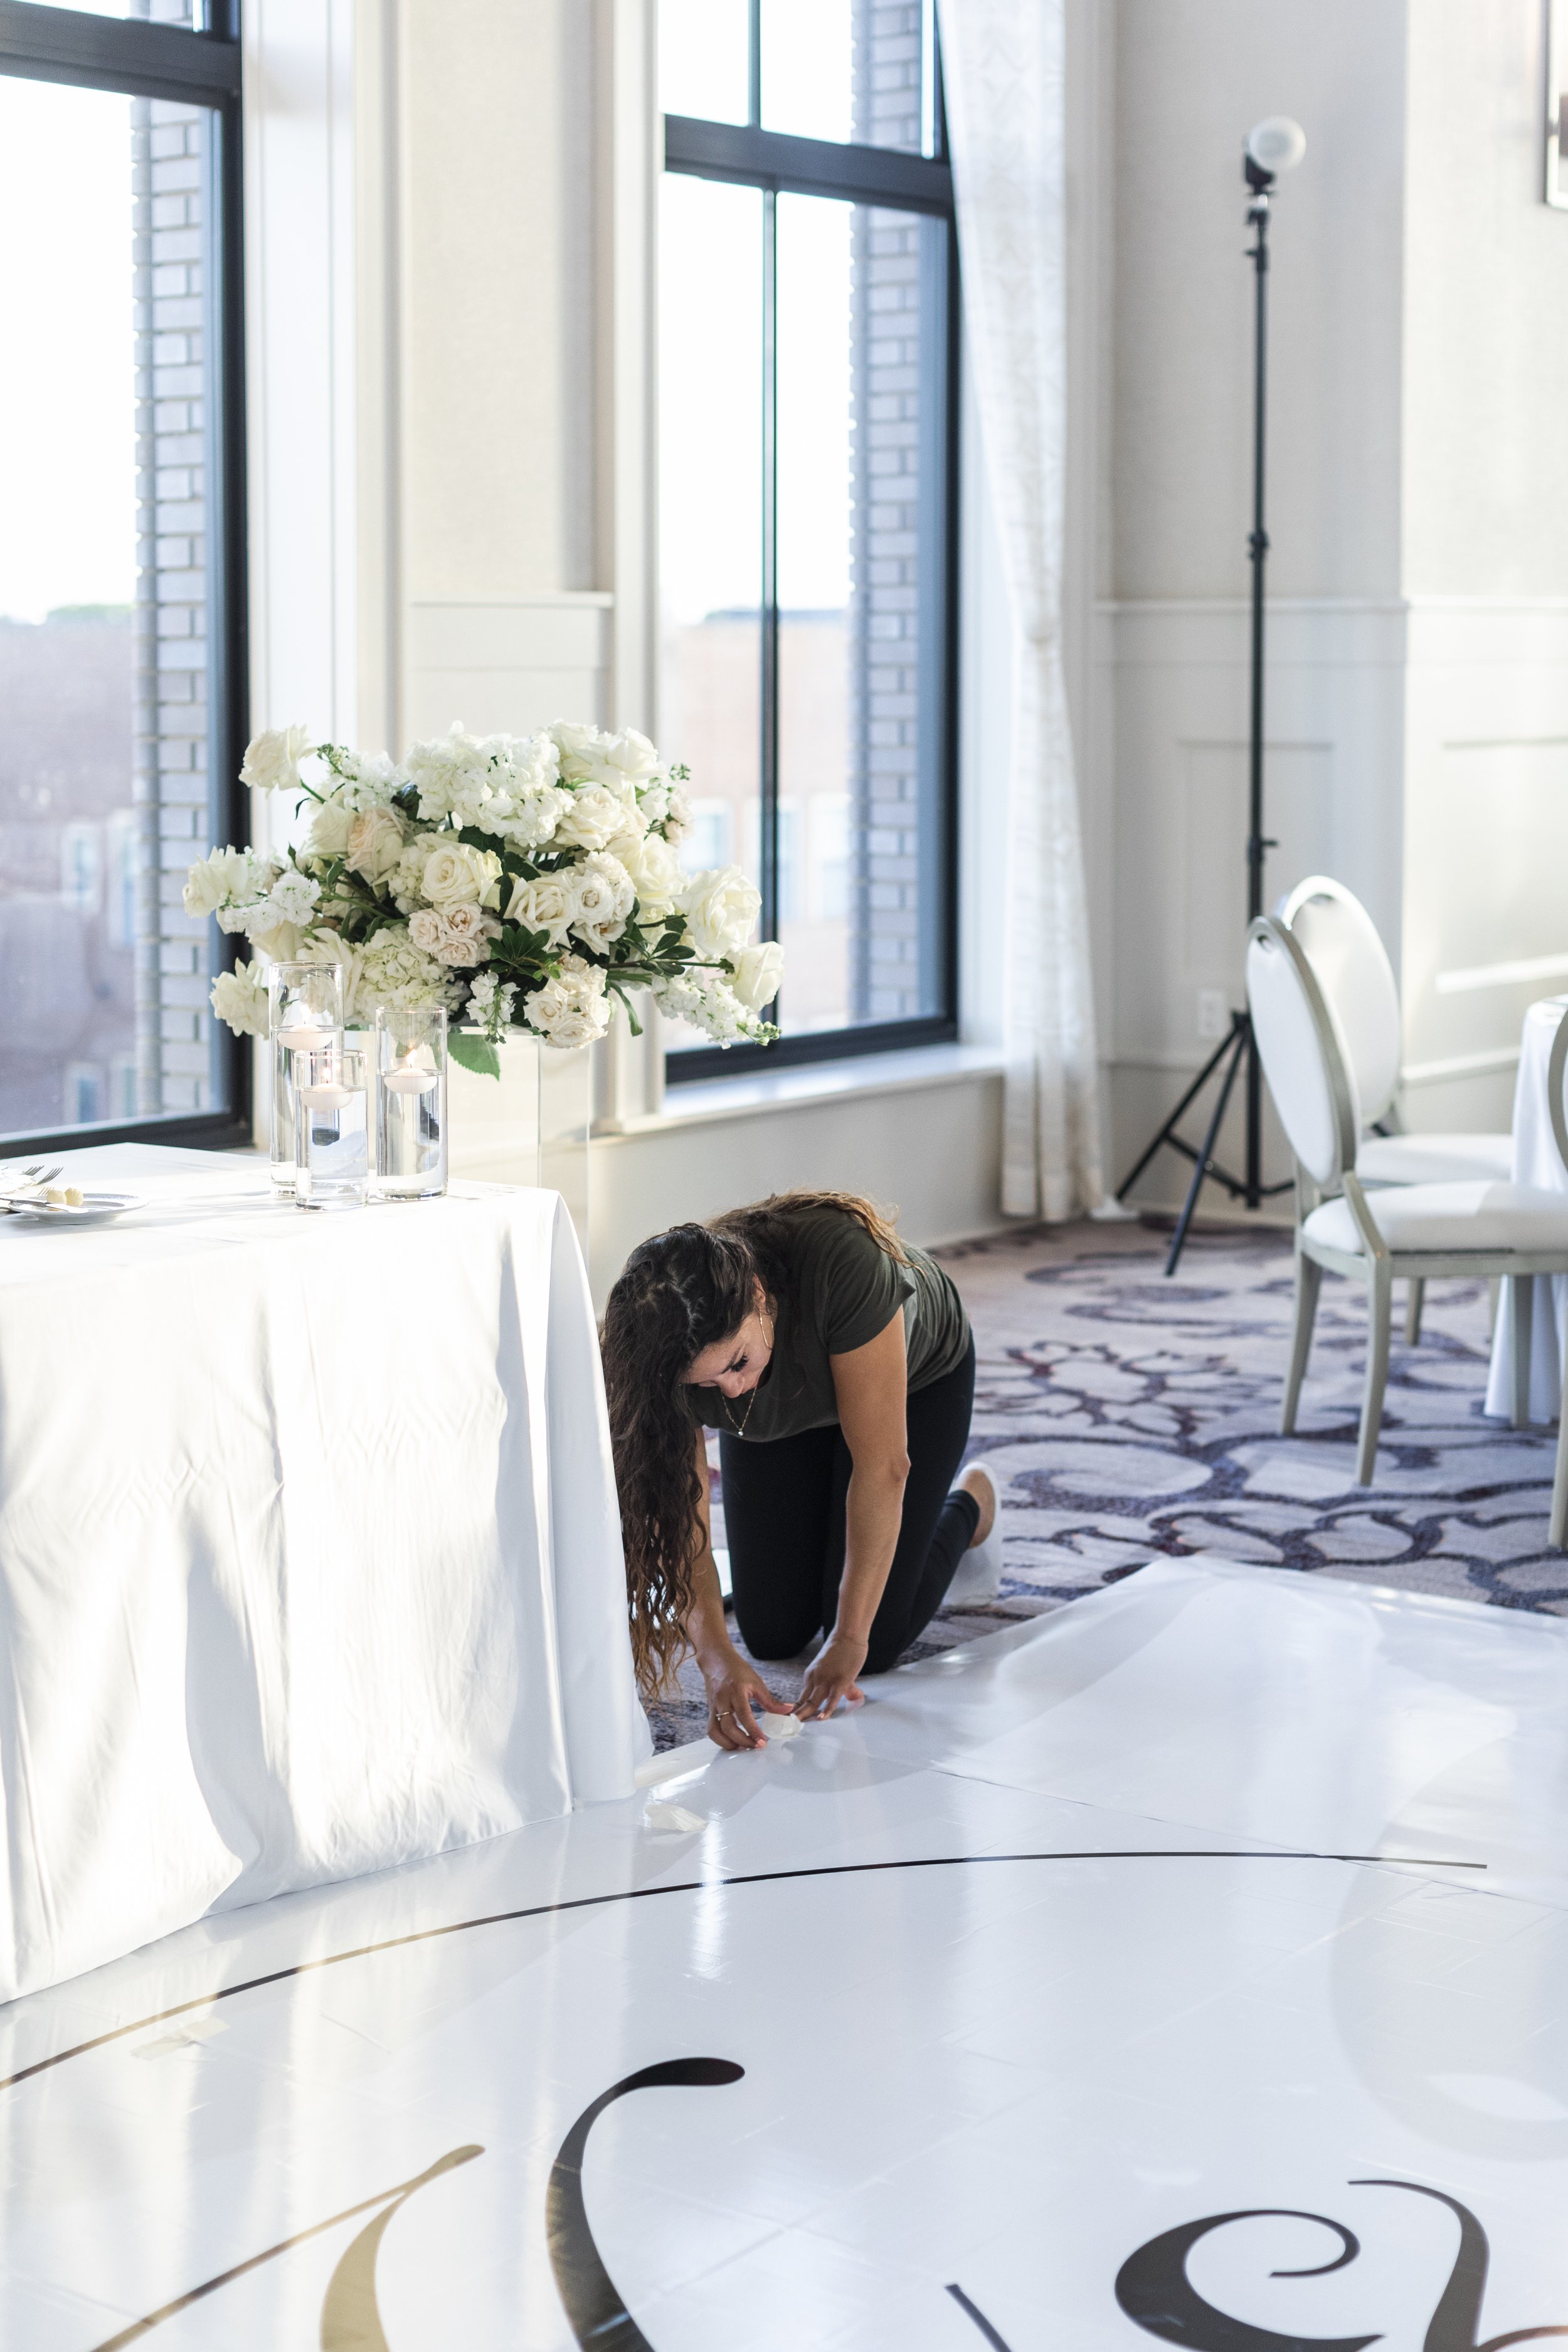  Savanna Richardson Photography captures a wedding planner working out details of a wedding. investing in your wedding Utah photog #savannarichardsonphotography #weddingplannervsvenuecooridnator #weddingphotographer #weddingphotographersUtah 